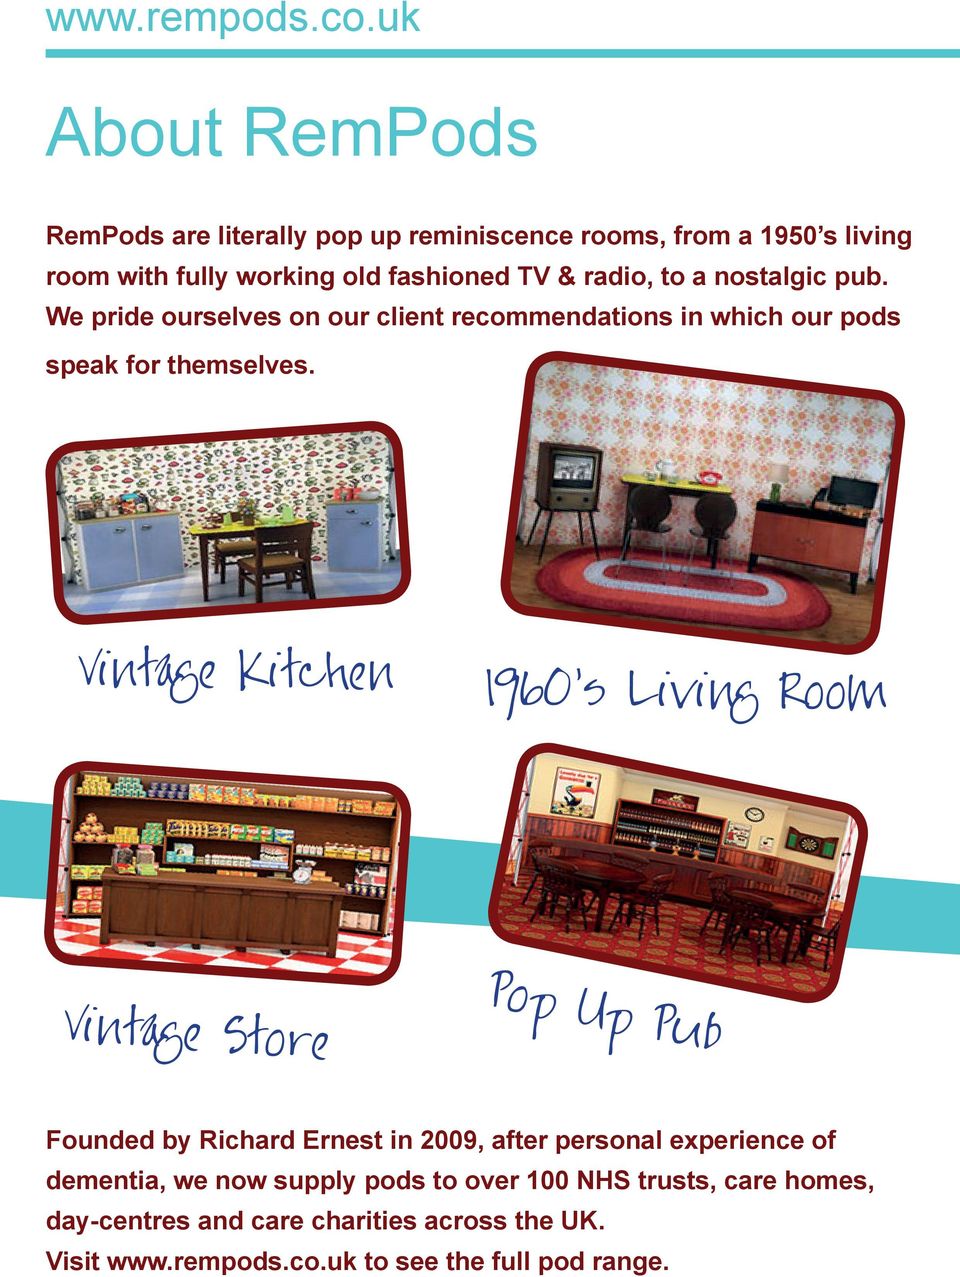 a nostalgic pub. We pride ourselves on our client recommendations in which our pods speak for themselves.